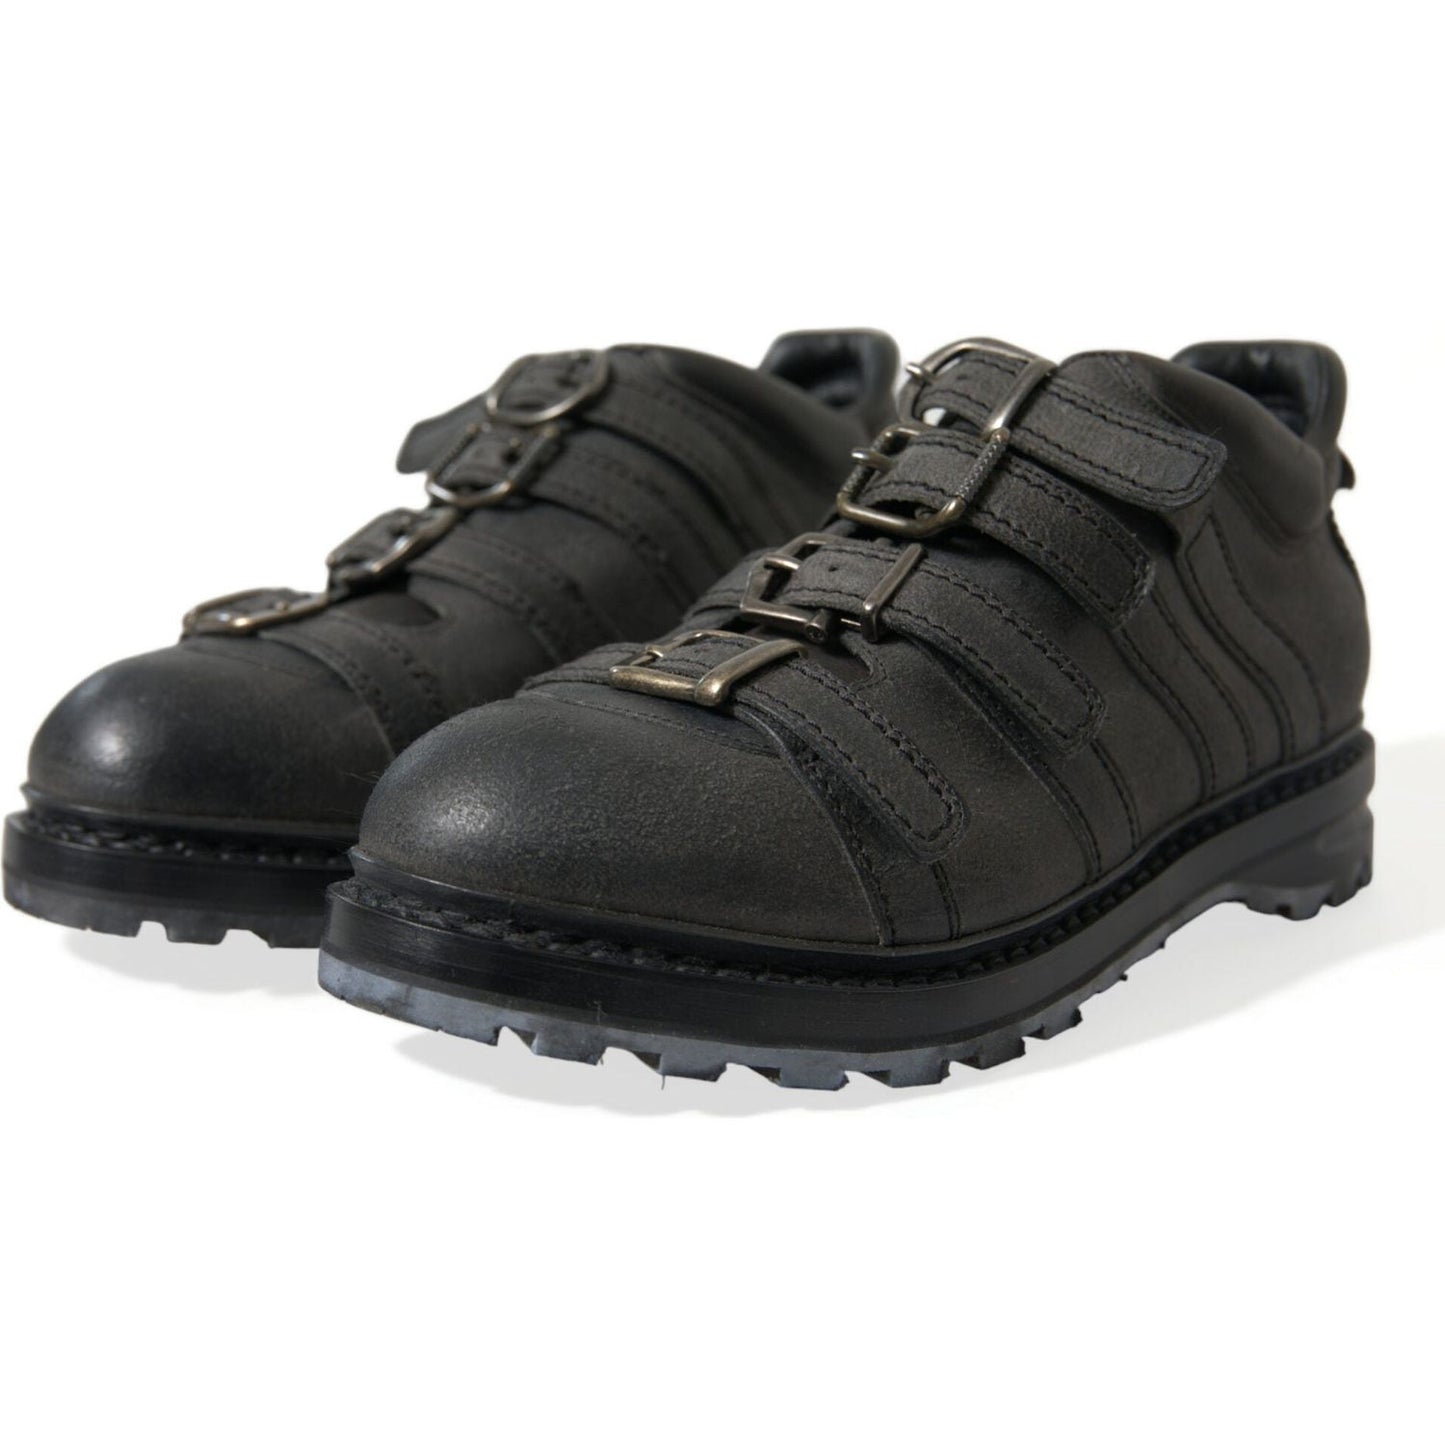 Dolce & Gabbana Black Leather Ankle Strap Boots black-leather-strap-men-ankle-boots-shoes